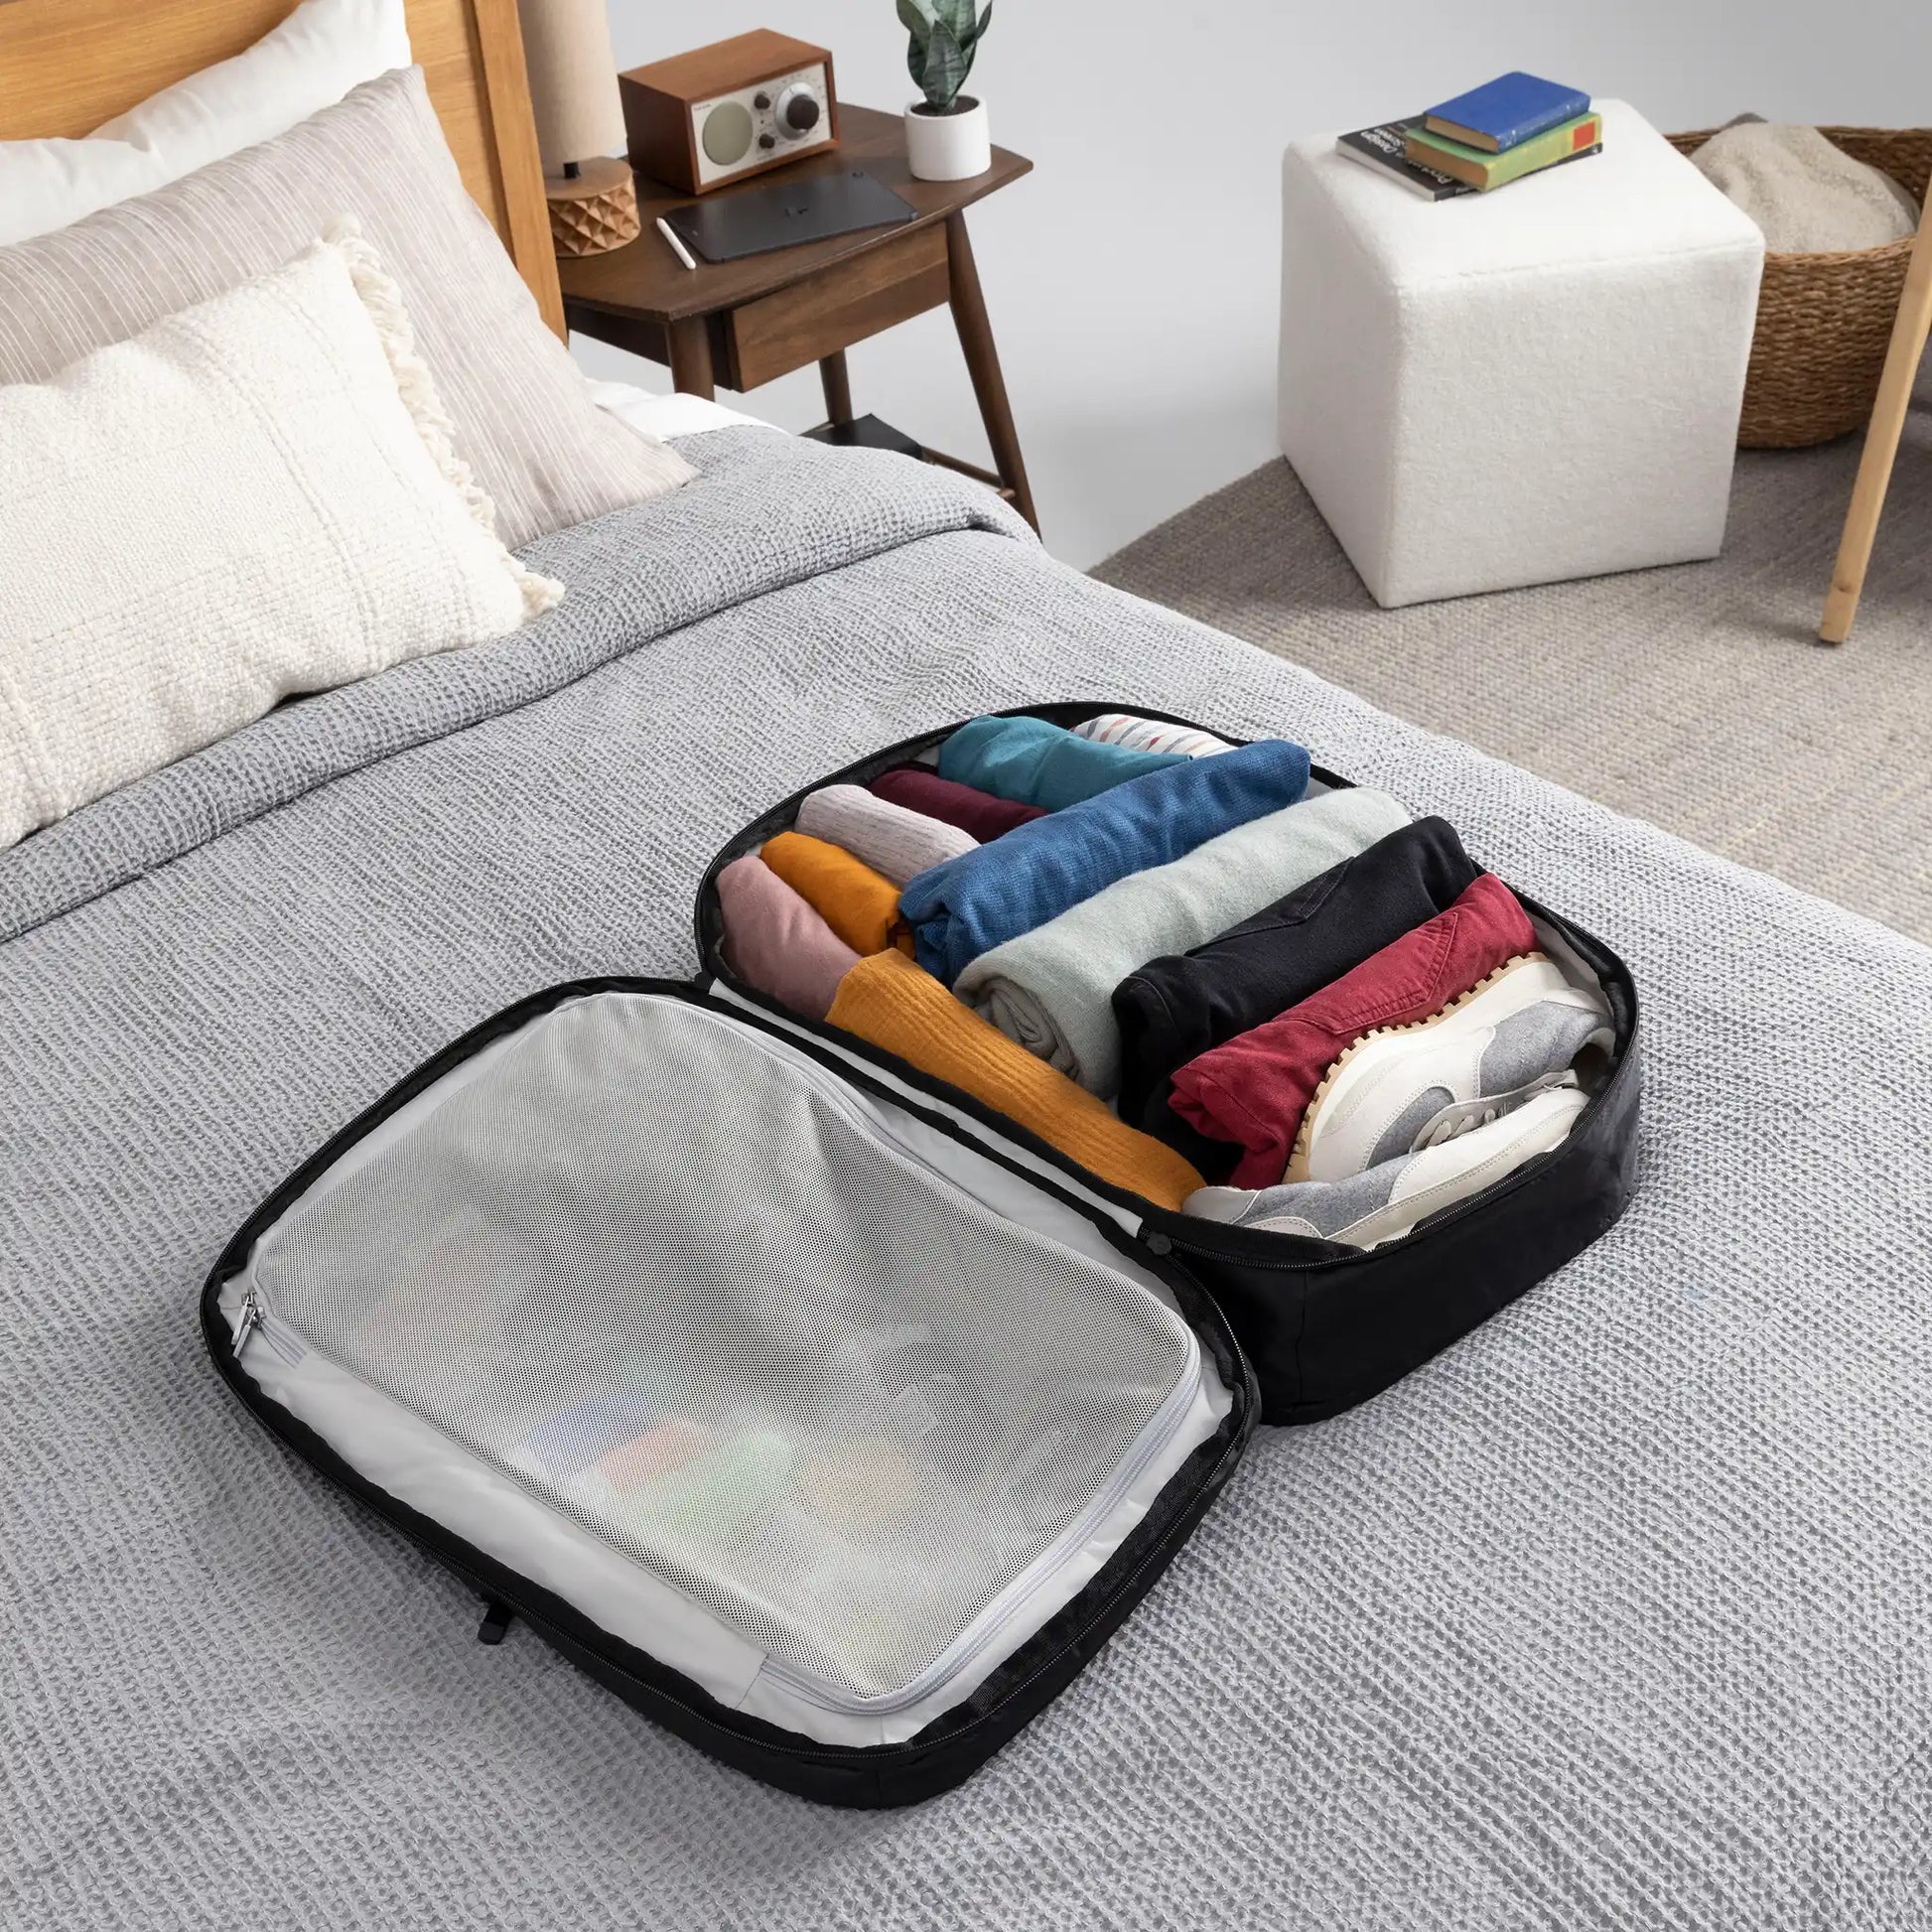 Packs like a suitcase for easy access and organization